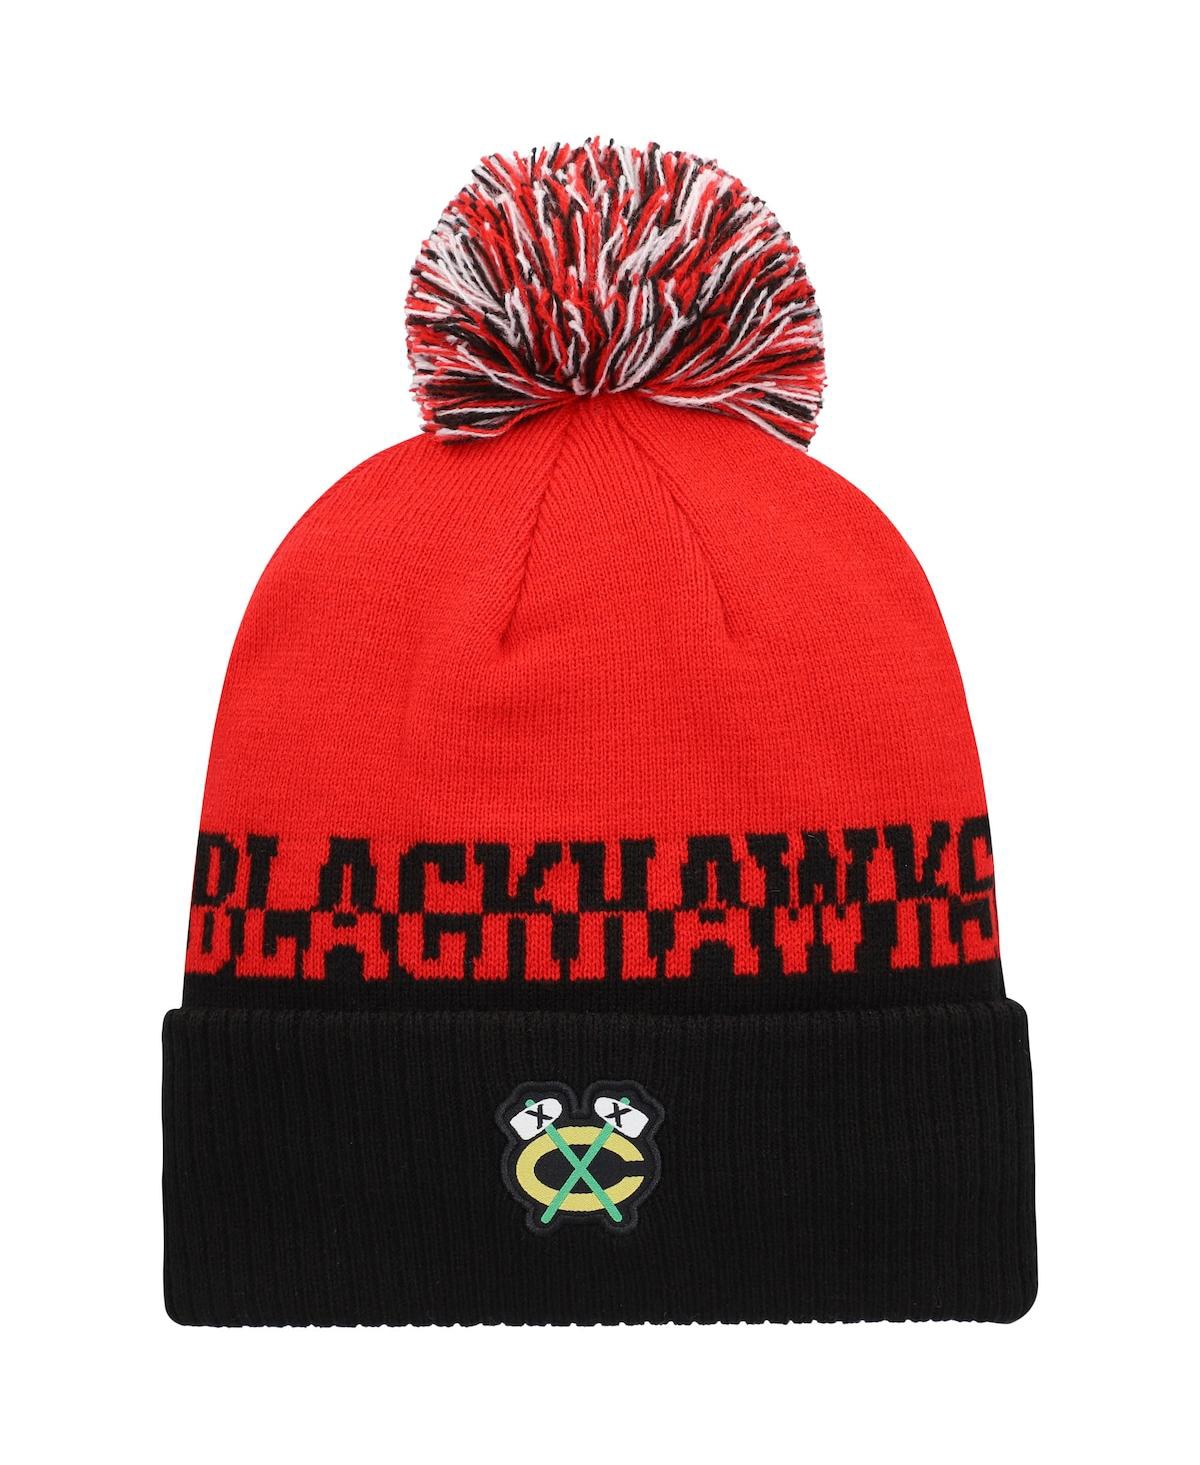 Adidas Originals Men's Red, Black Chicago Blackhawks Cold.rdy Cuffed Knit Hat With Pom In Red,black